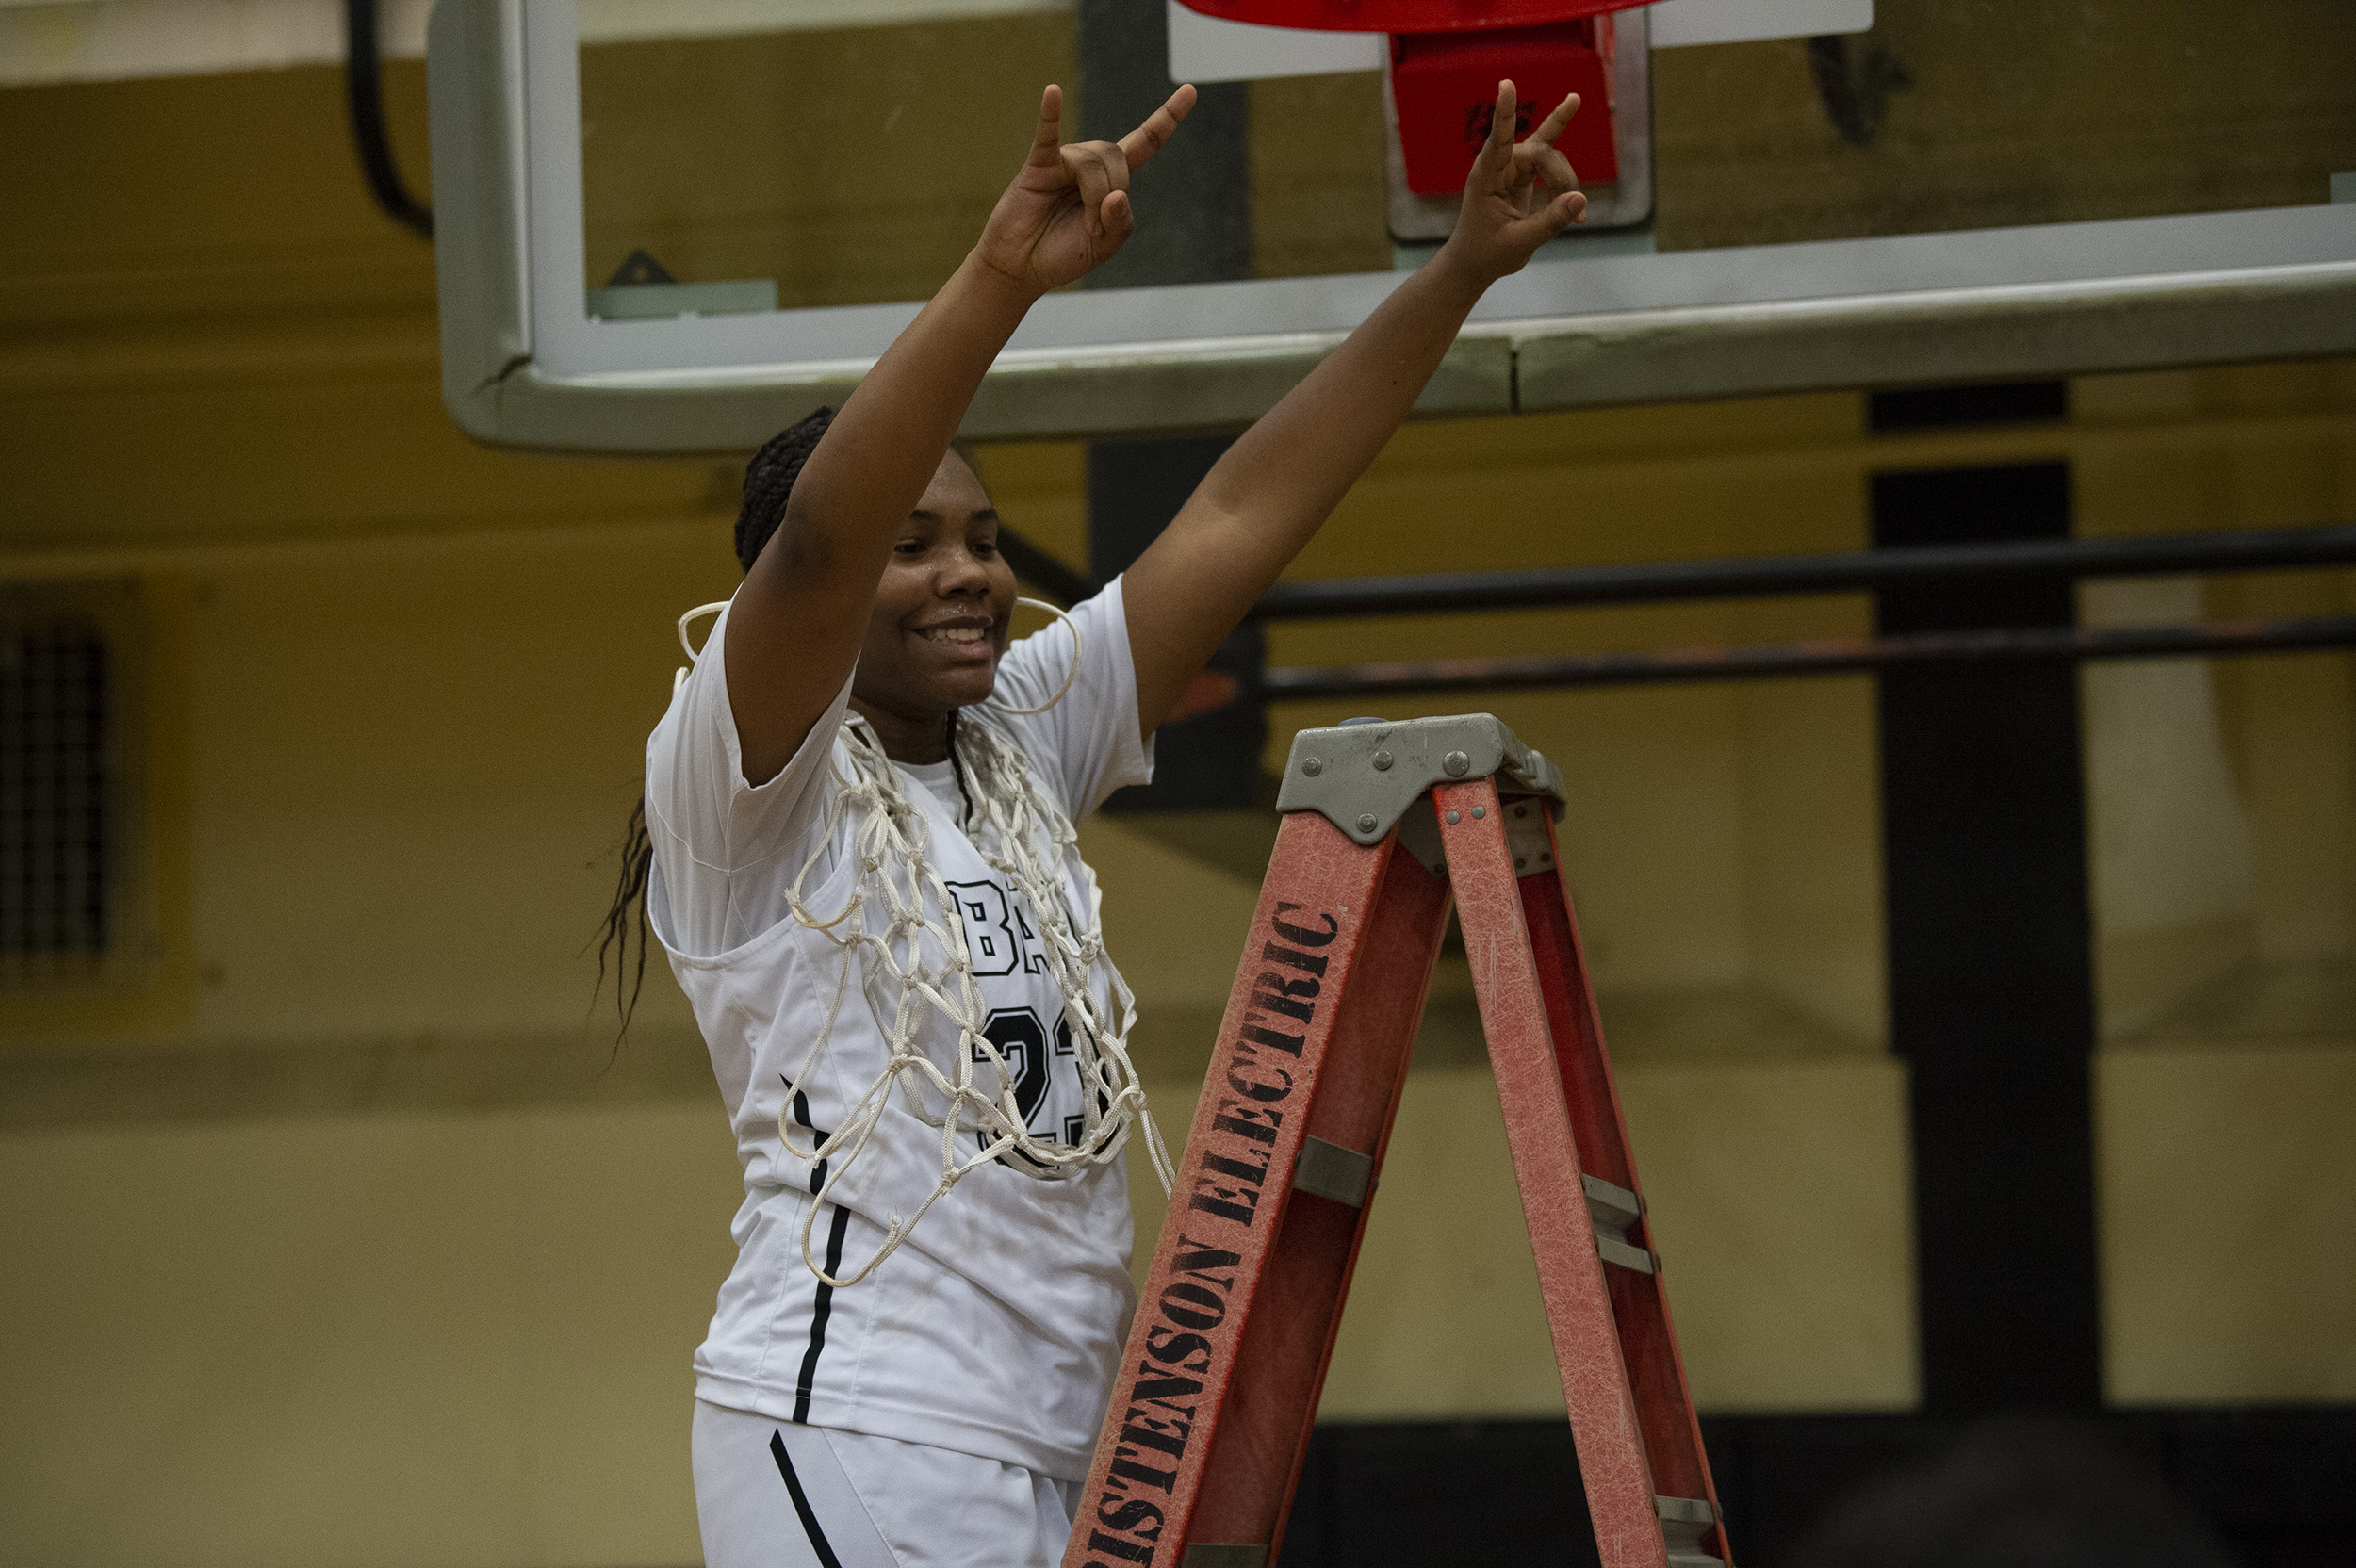 Senior Aniyah Hampton celebrates after cutting down the net after Hudson's Bay beat Woodland 60-18 to clinch the 2A Greater St. Helens League girls bassketball title on Thursday, Feb. 3, 2022.